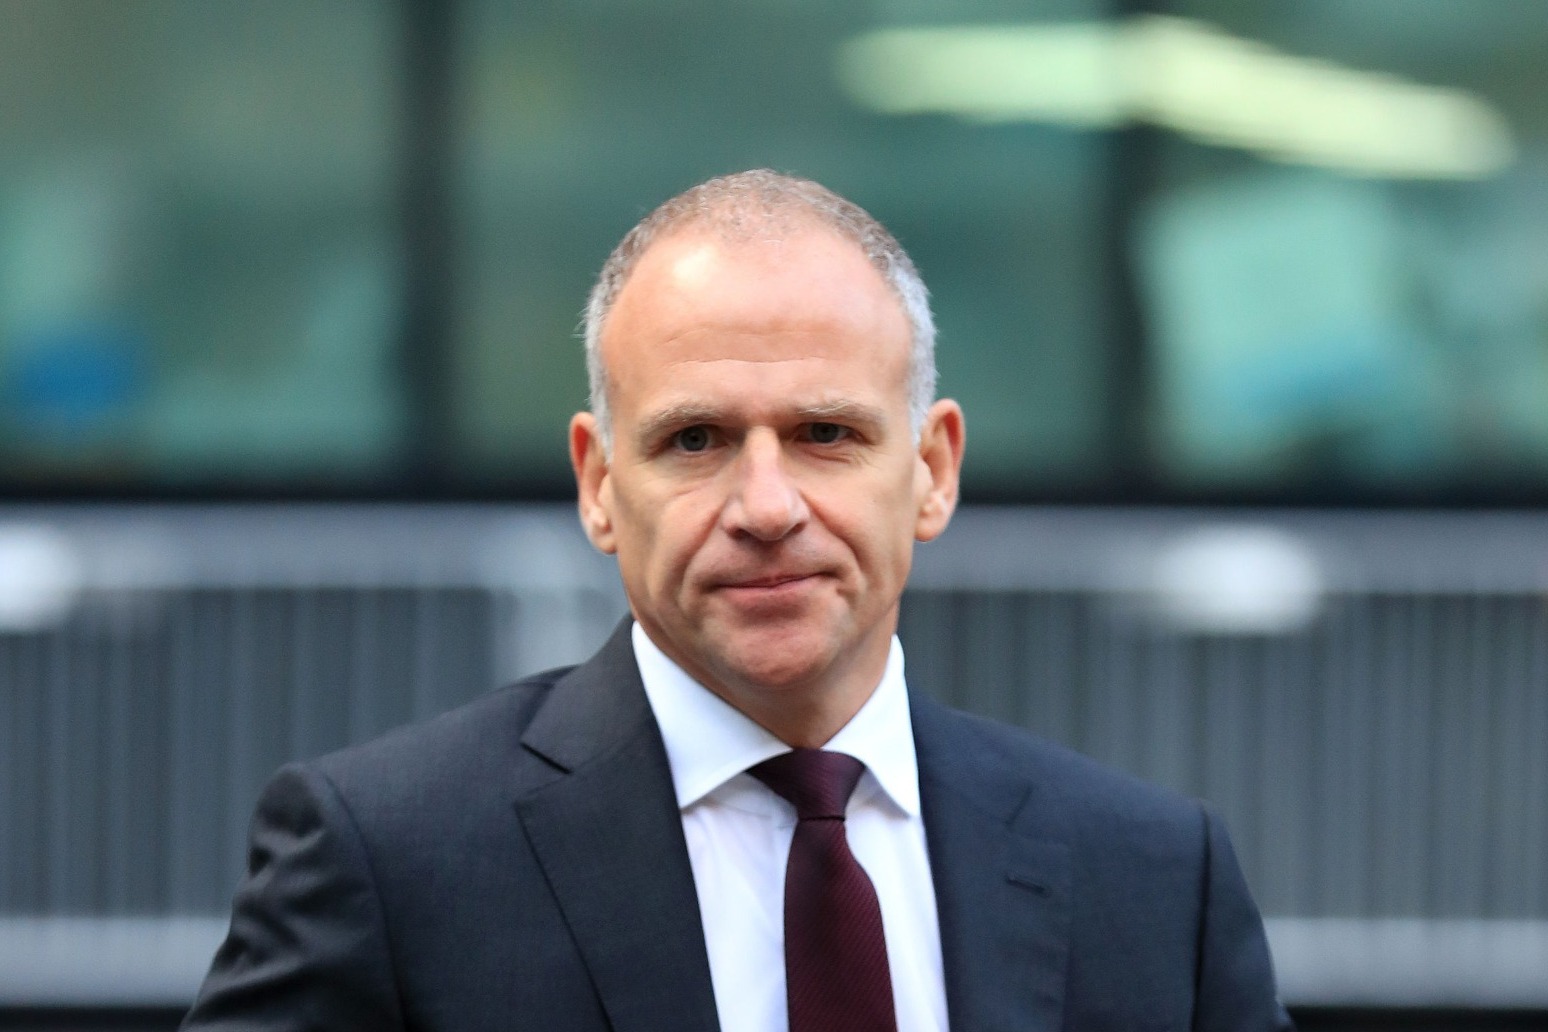 TESCO BOSS DAVE LEWIS TO STEP DOWN NEXT YEAR 